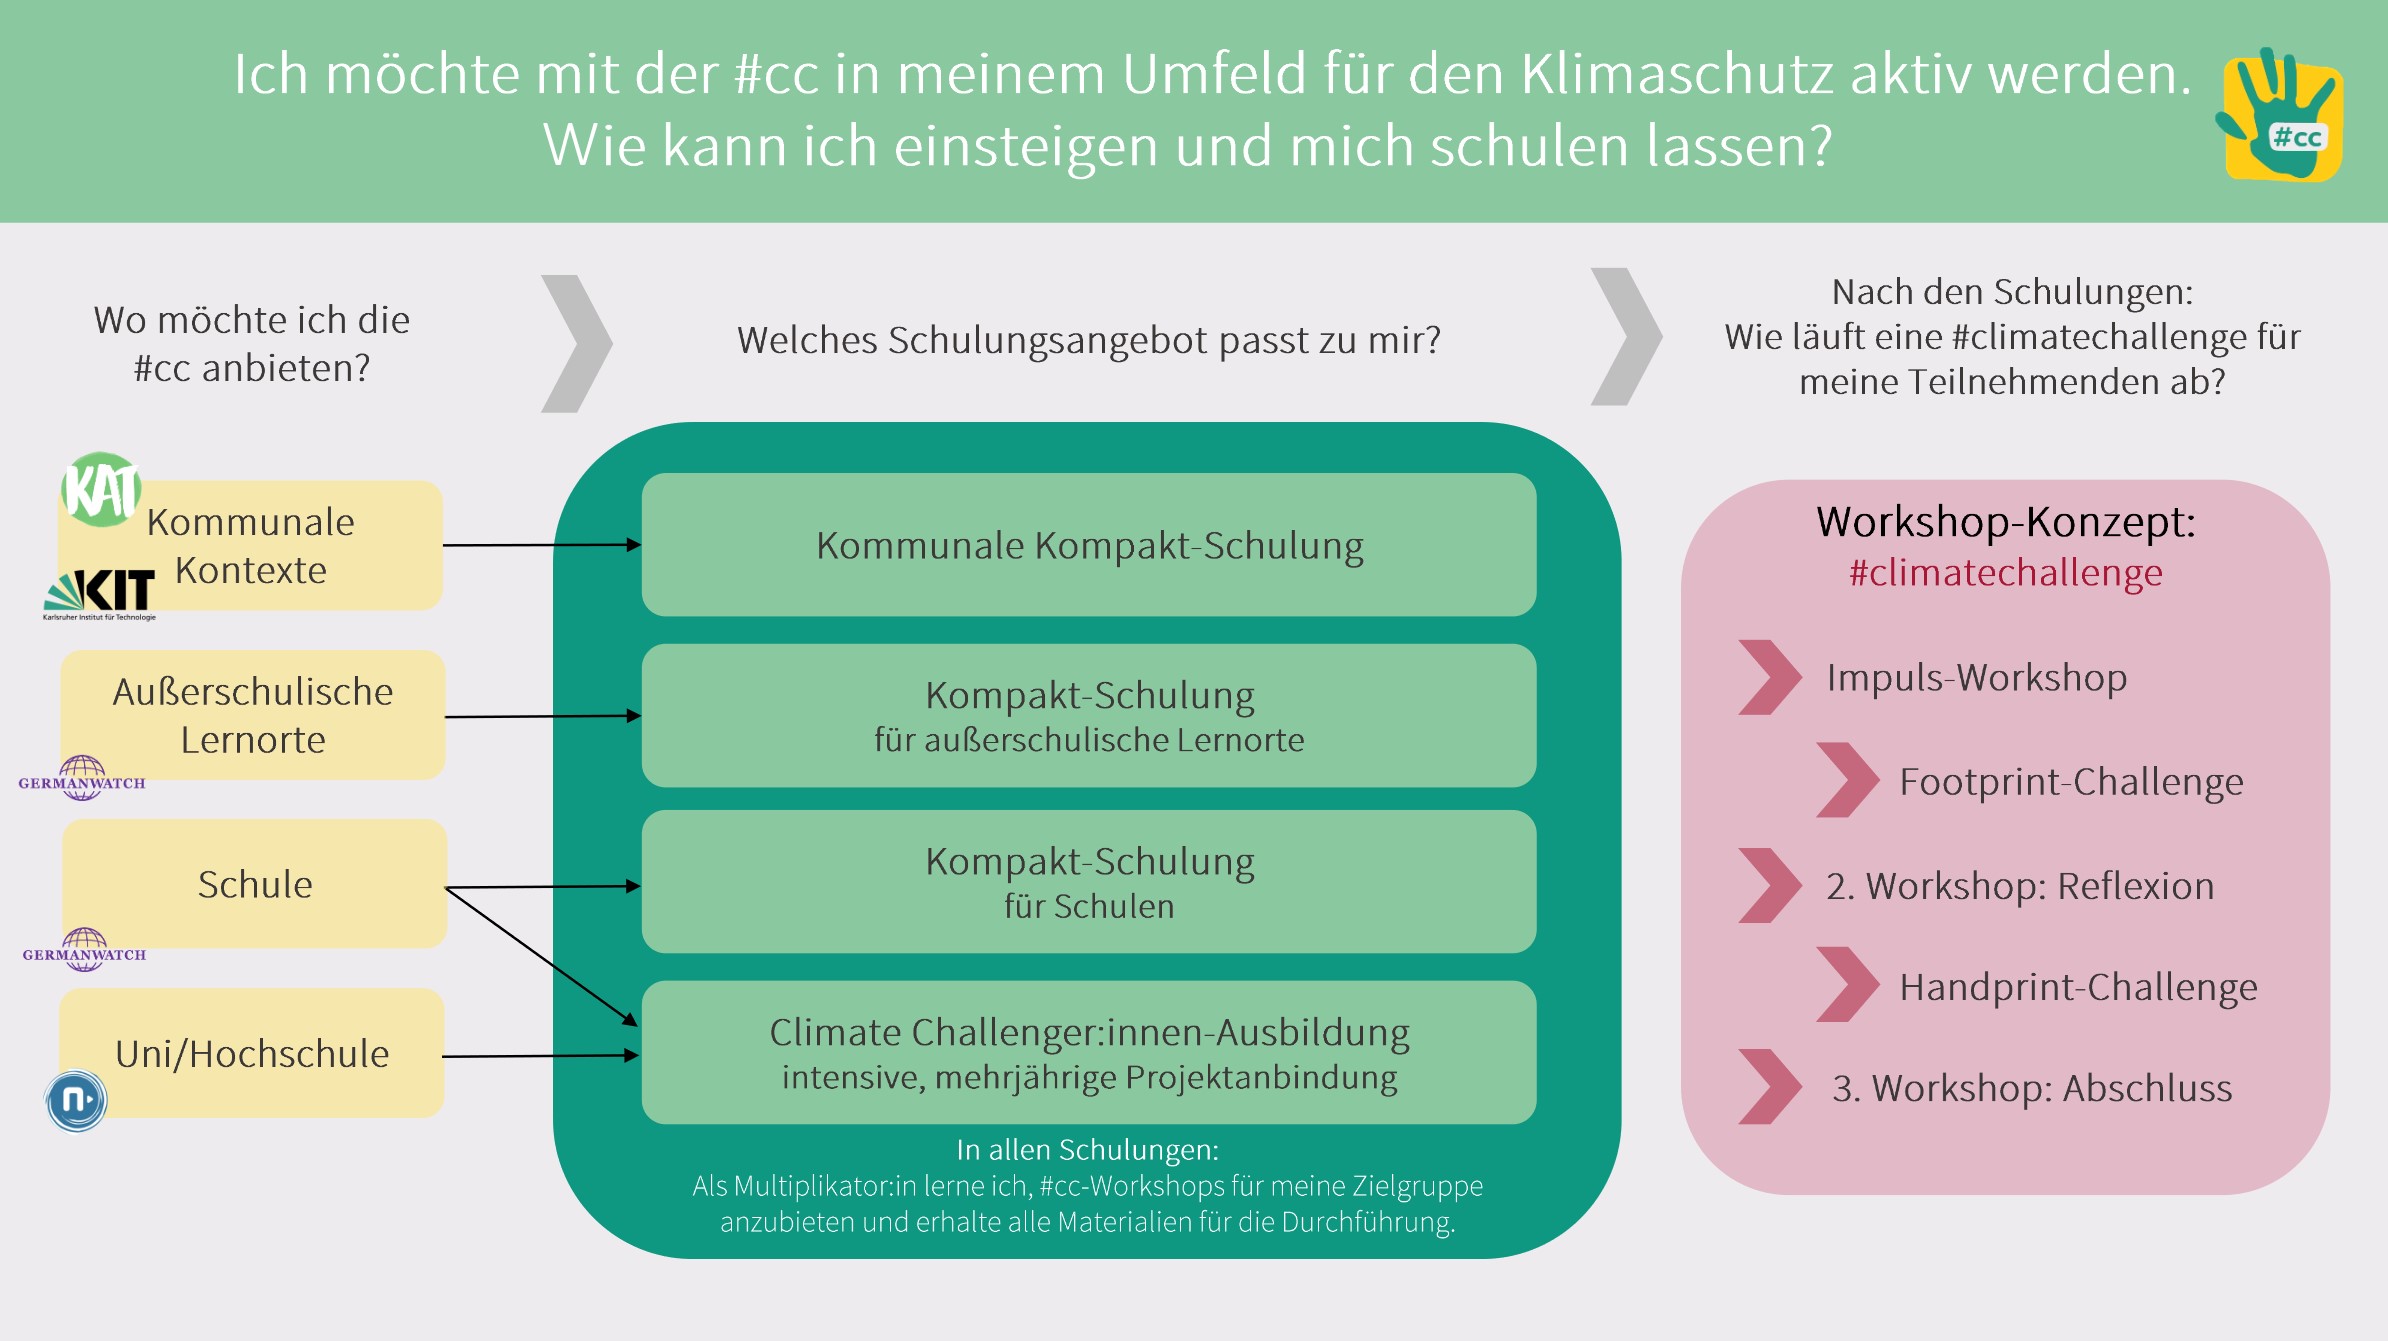 grafic: how to join the climatechallnge?